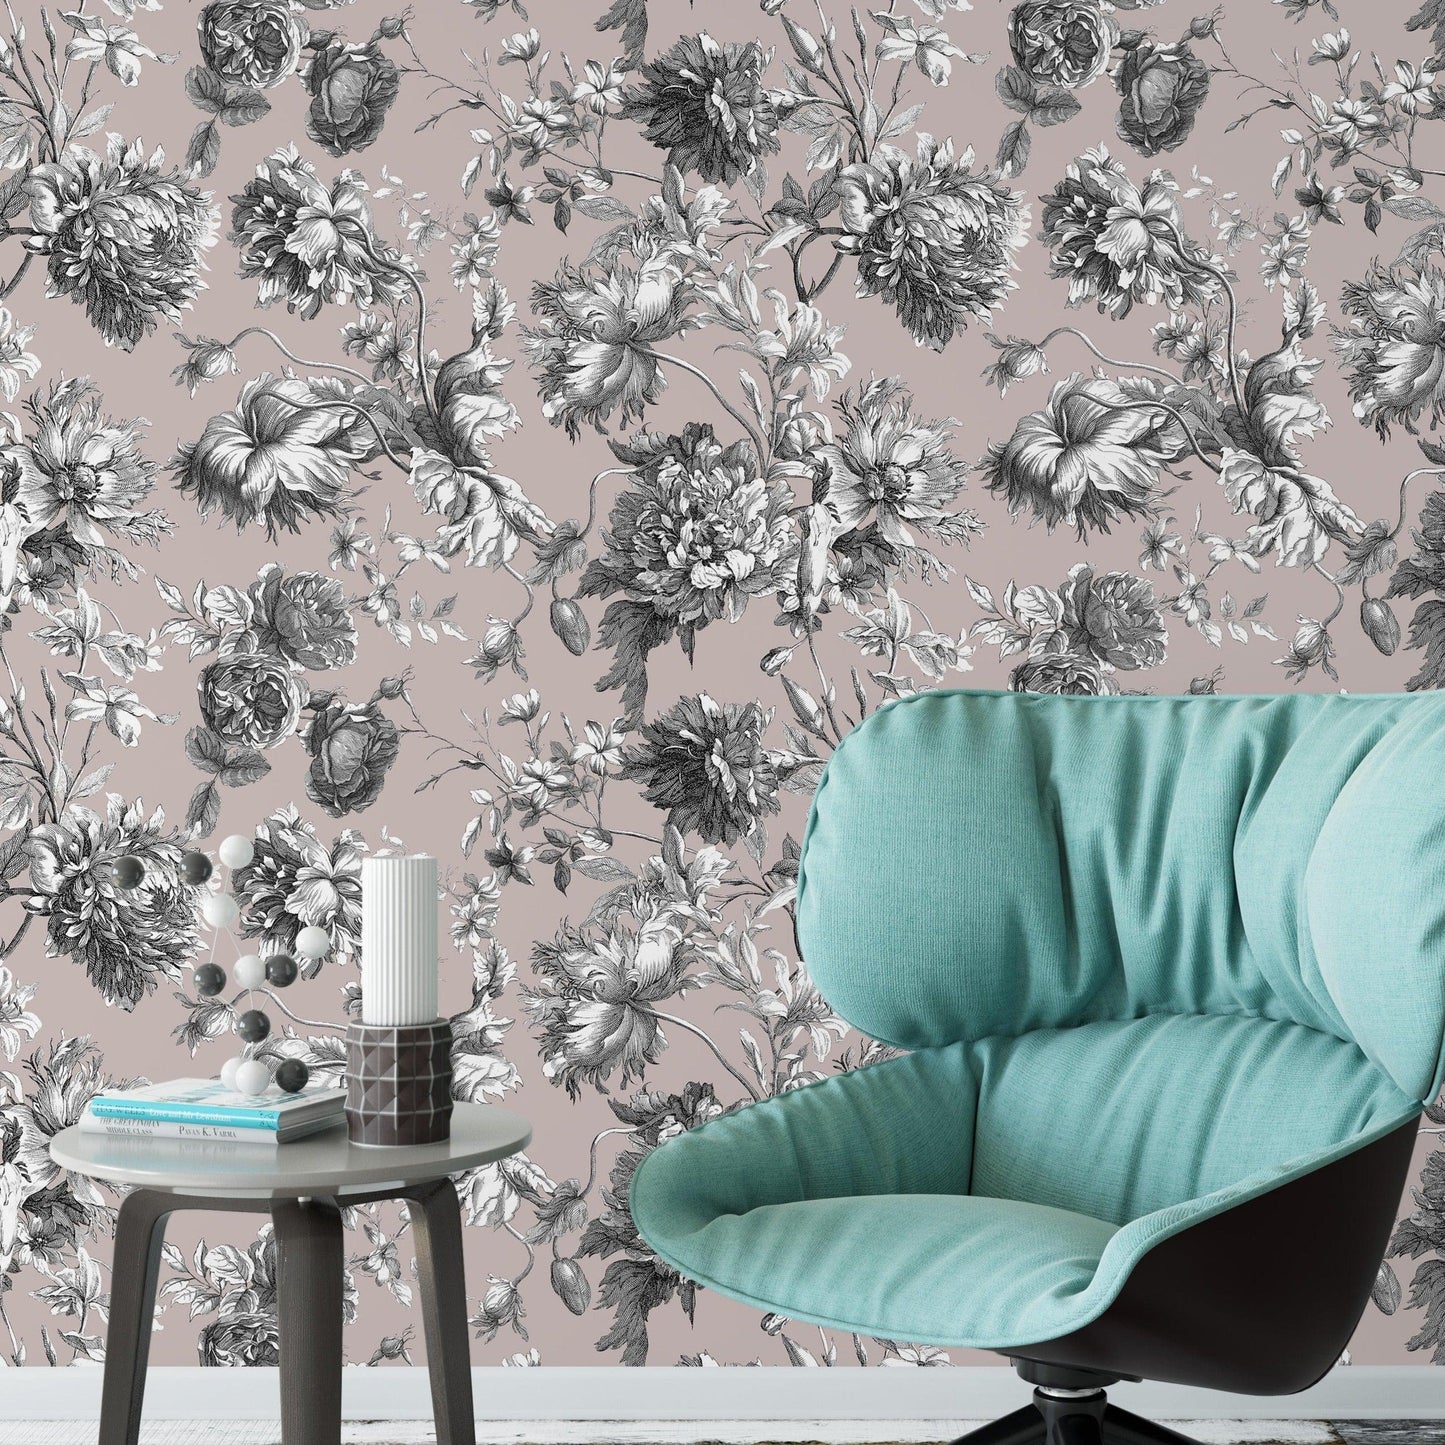 Scandinavian Style Mountains and Routs Removable Wallpaper Scandinavian Style Mountains and Routs Removable Wallpaper French Toile Pink Flower Provence Vintage Romantic Wallpaper 